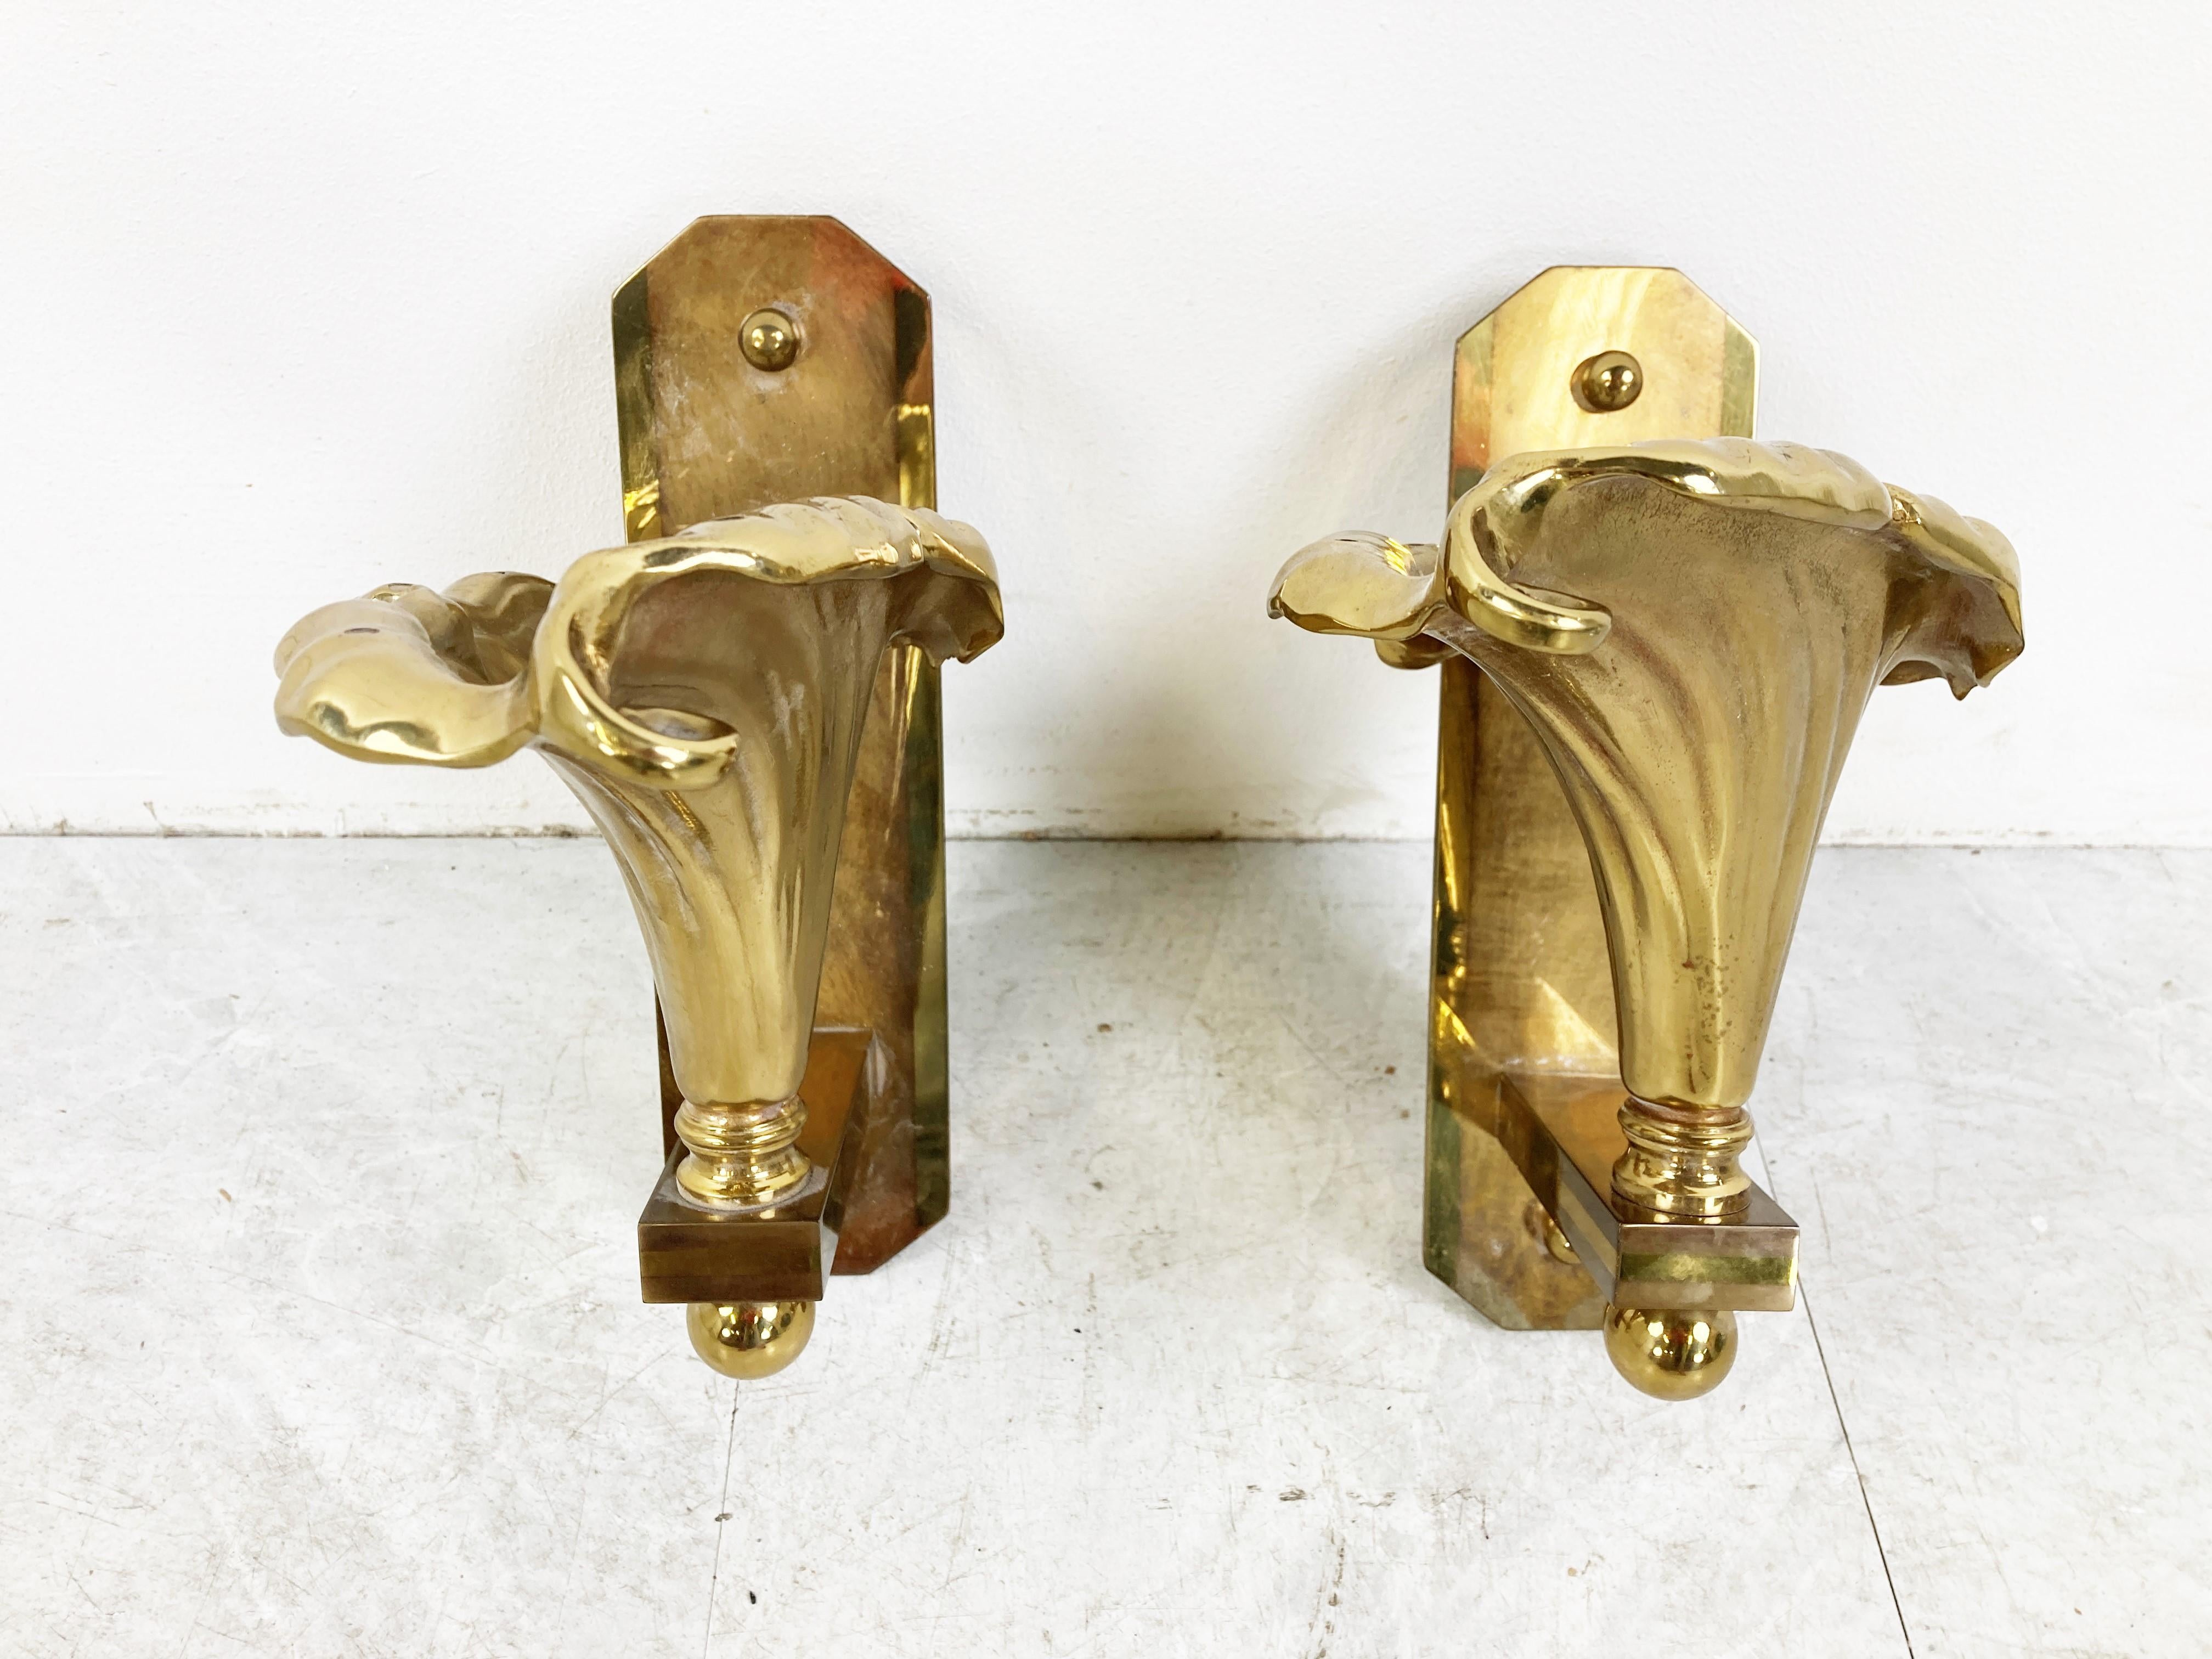 Pair of heavy bronze flower wall lamps.

The spectacular wall sconces where made in belgium and are beautifully made.

1970s - Belgium

Good condition, tested and ready to use 

Work with GU 10 spots 

Dimension:
Height: